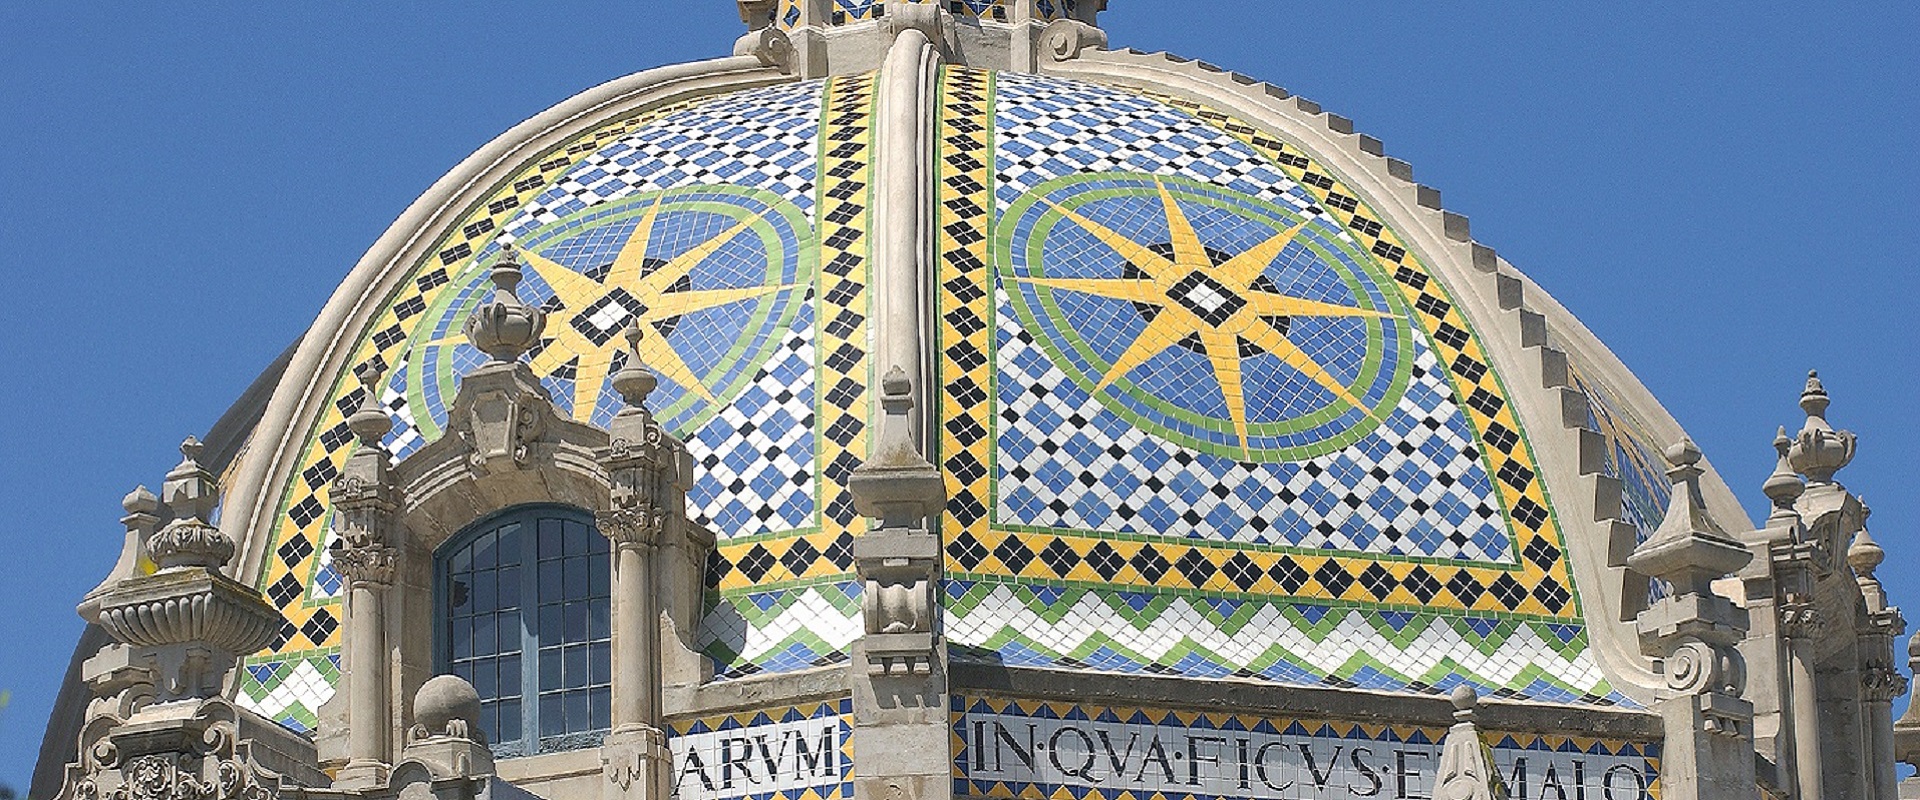 Tiled geometric designs with yellow, blue, green, and white on a dome in Balboa Park.